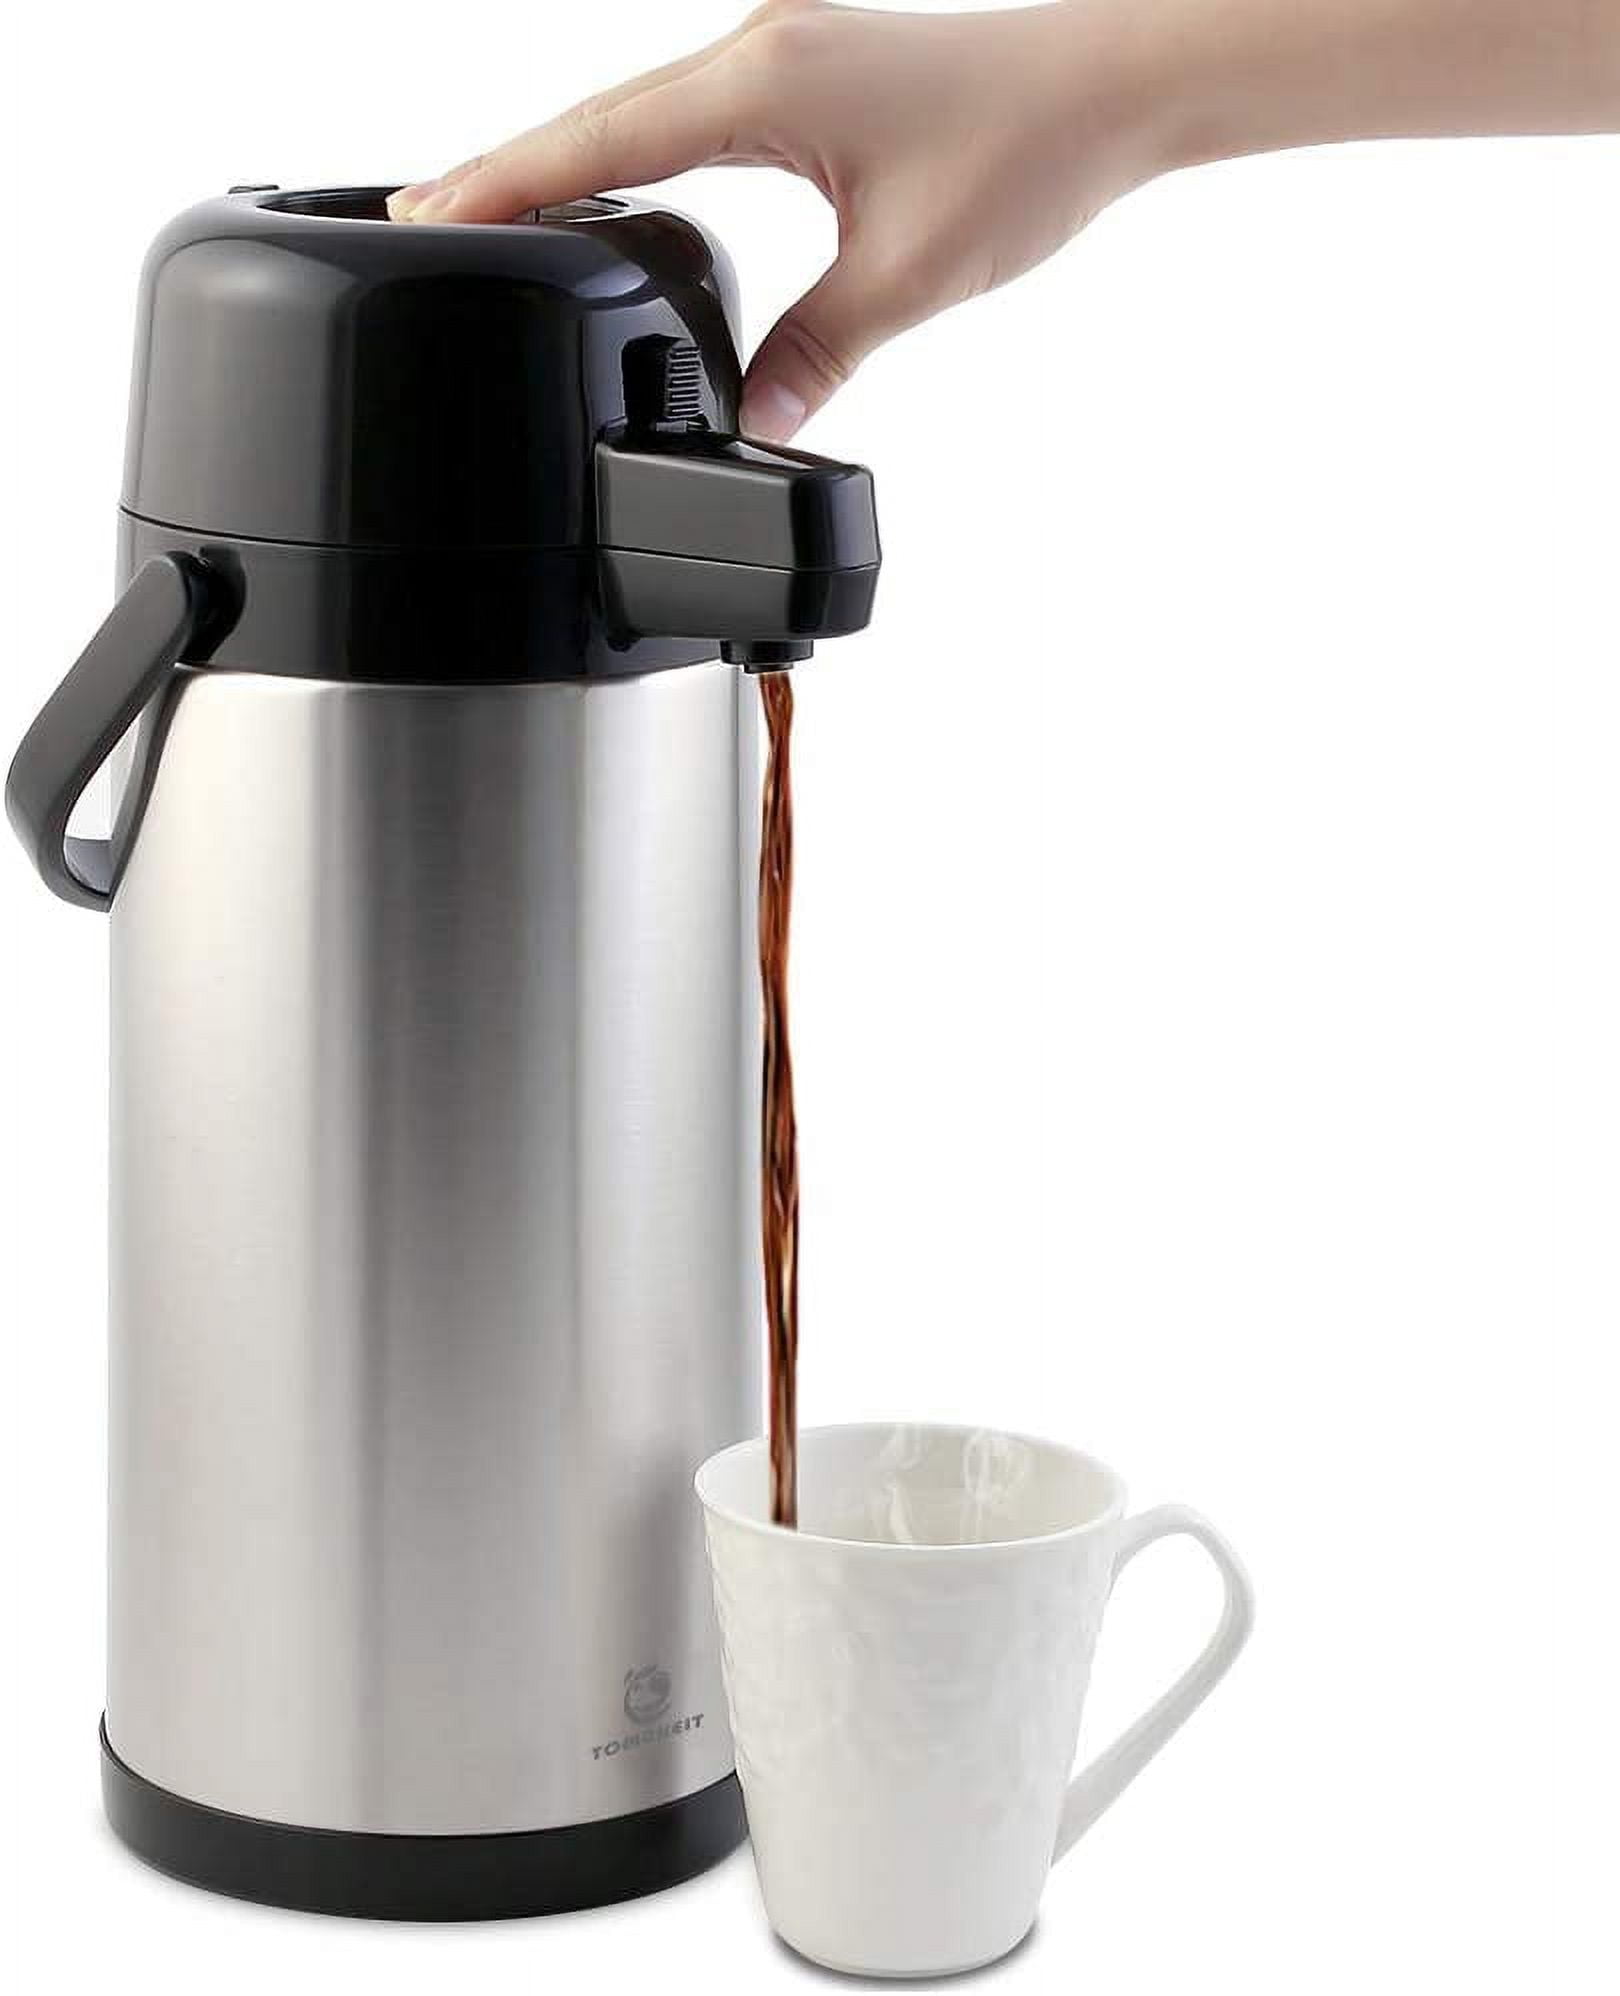 Oggi Air King Pump Pot Insulated Stainless Steel Beverage Server 3